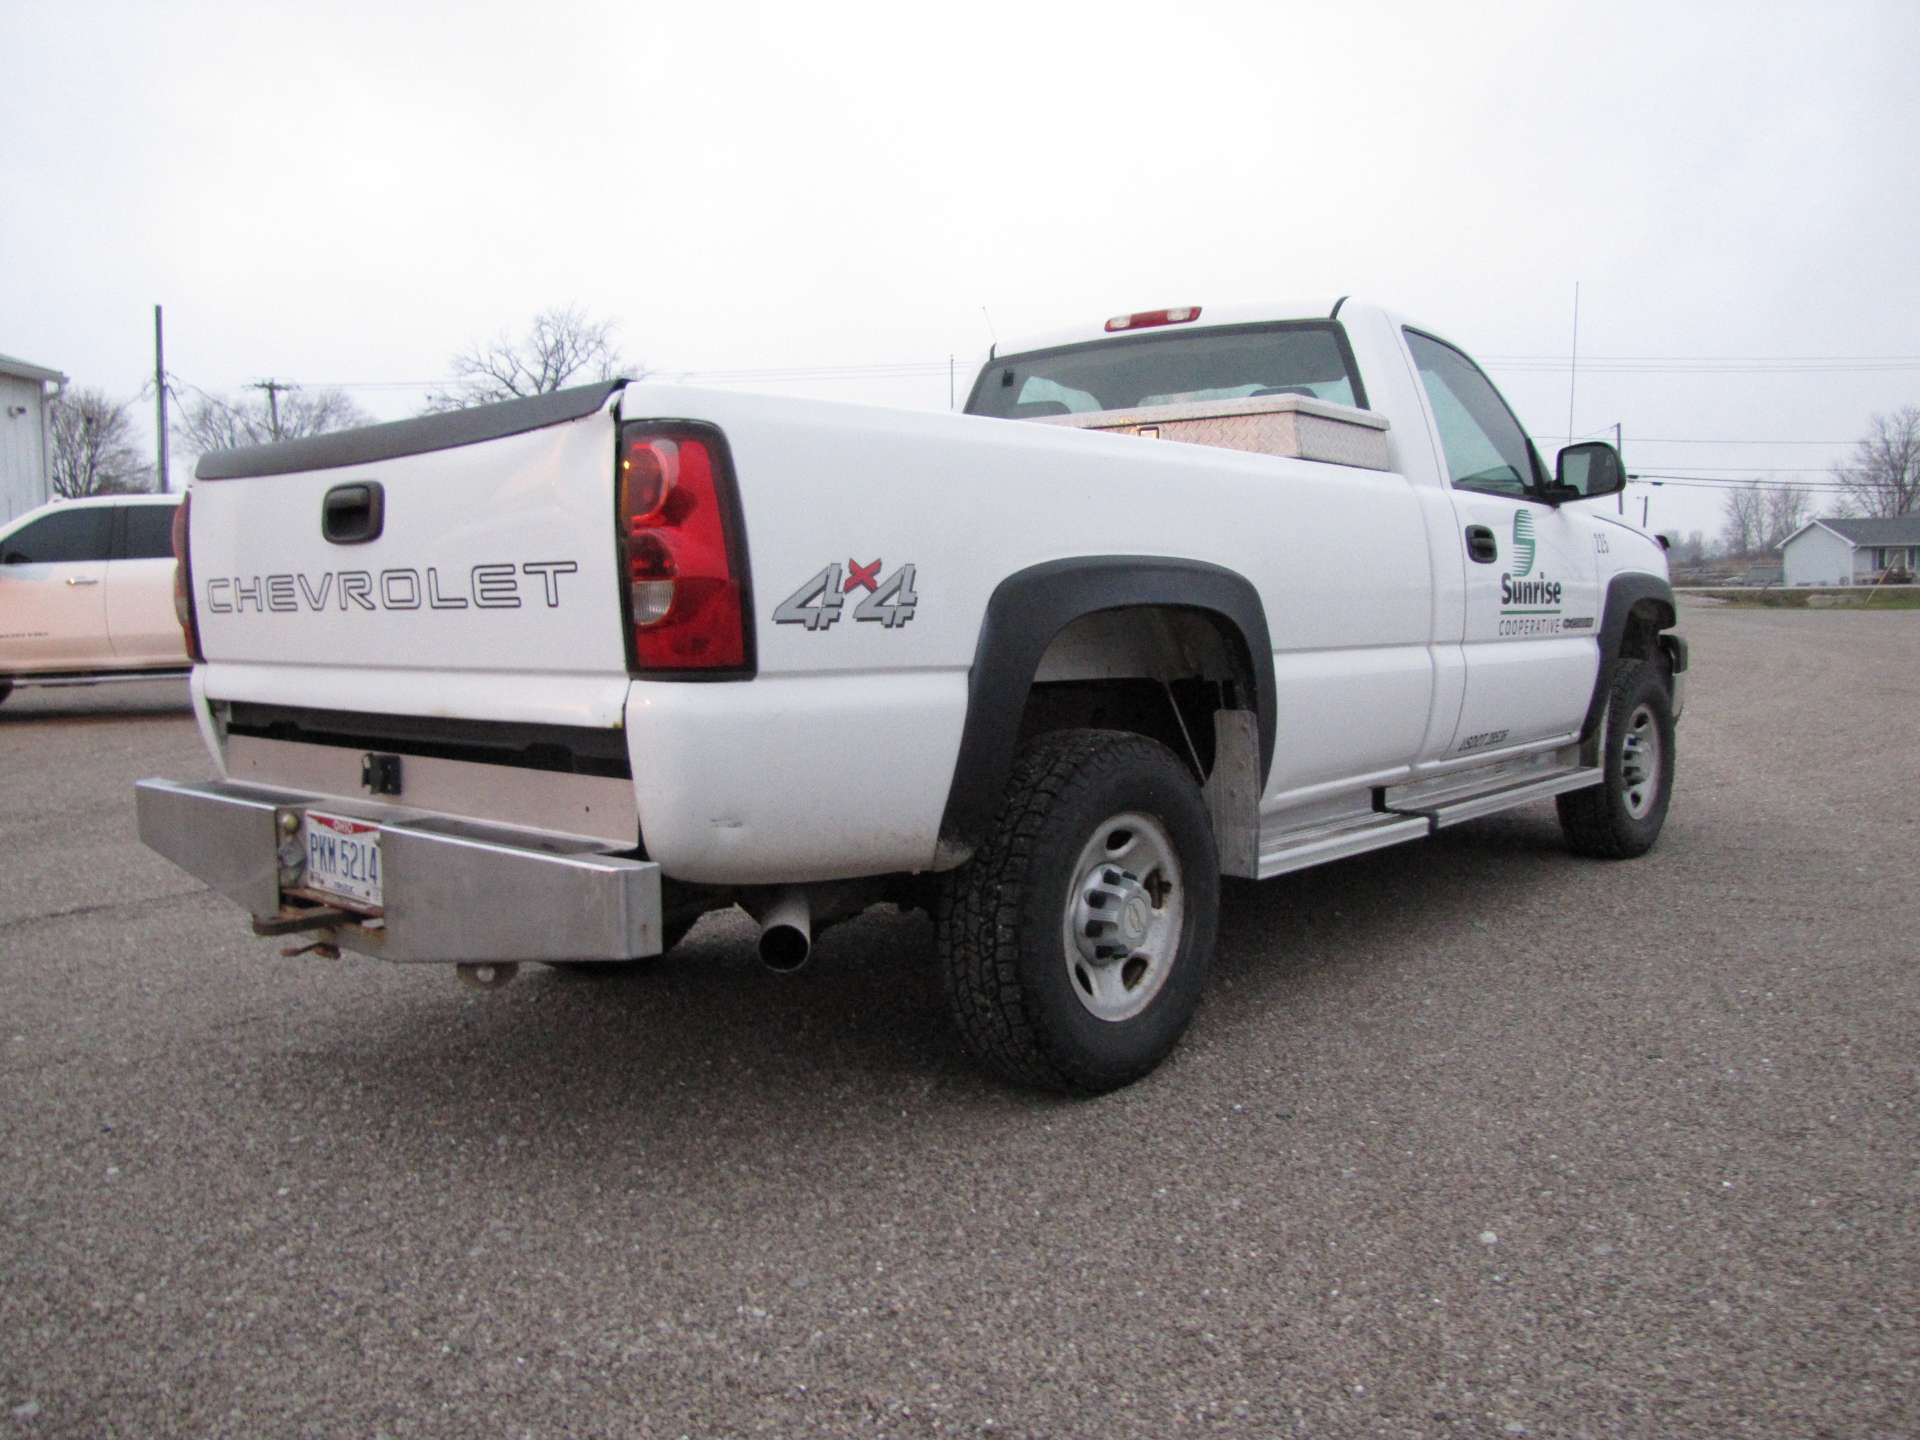 2006 Chevy 2500 HD pickup truck - Image 8 of 65